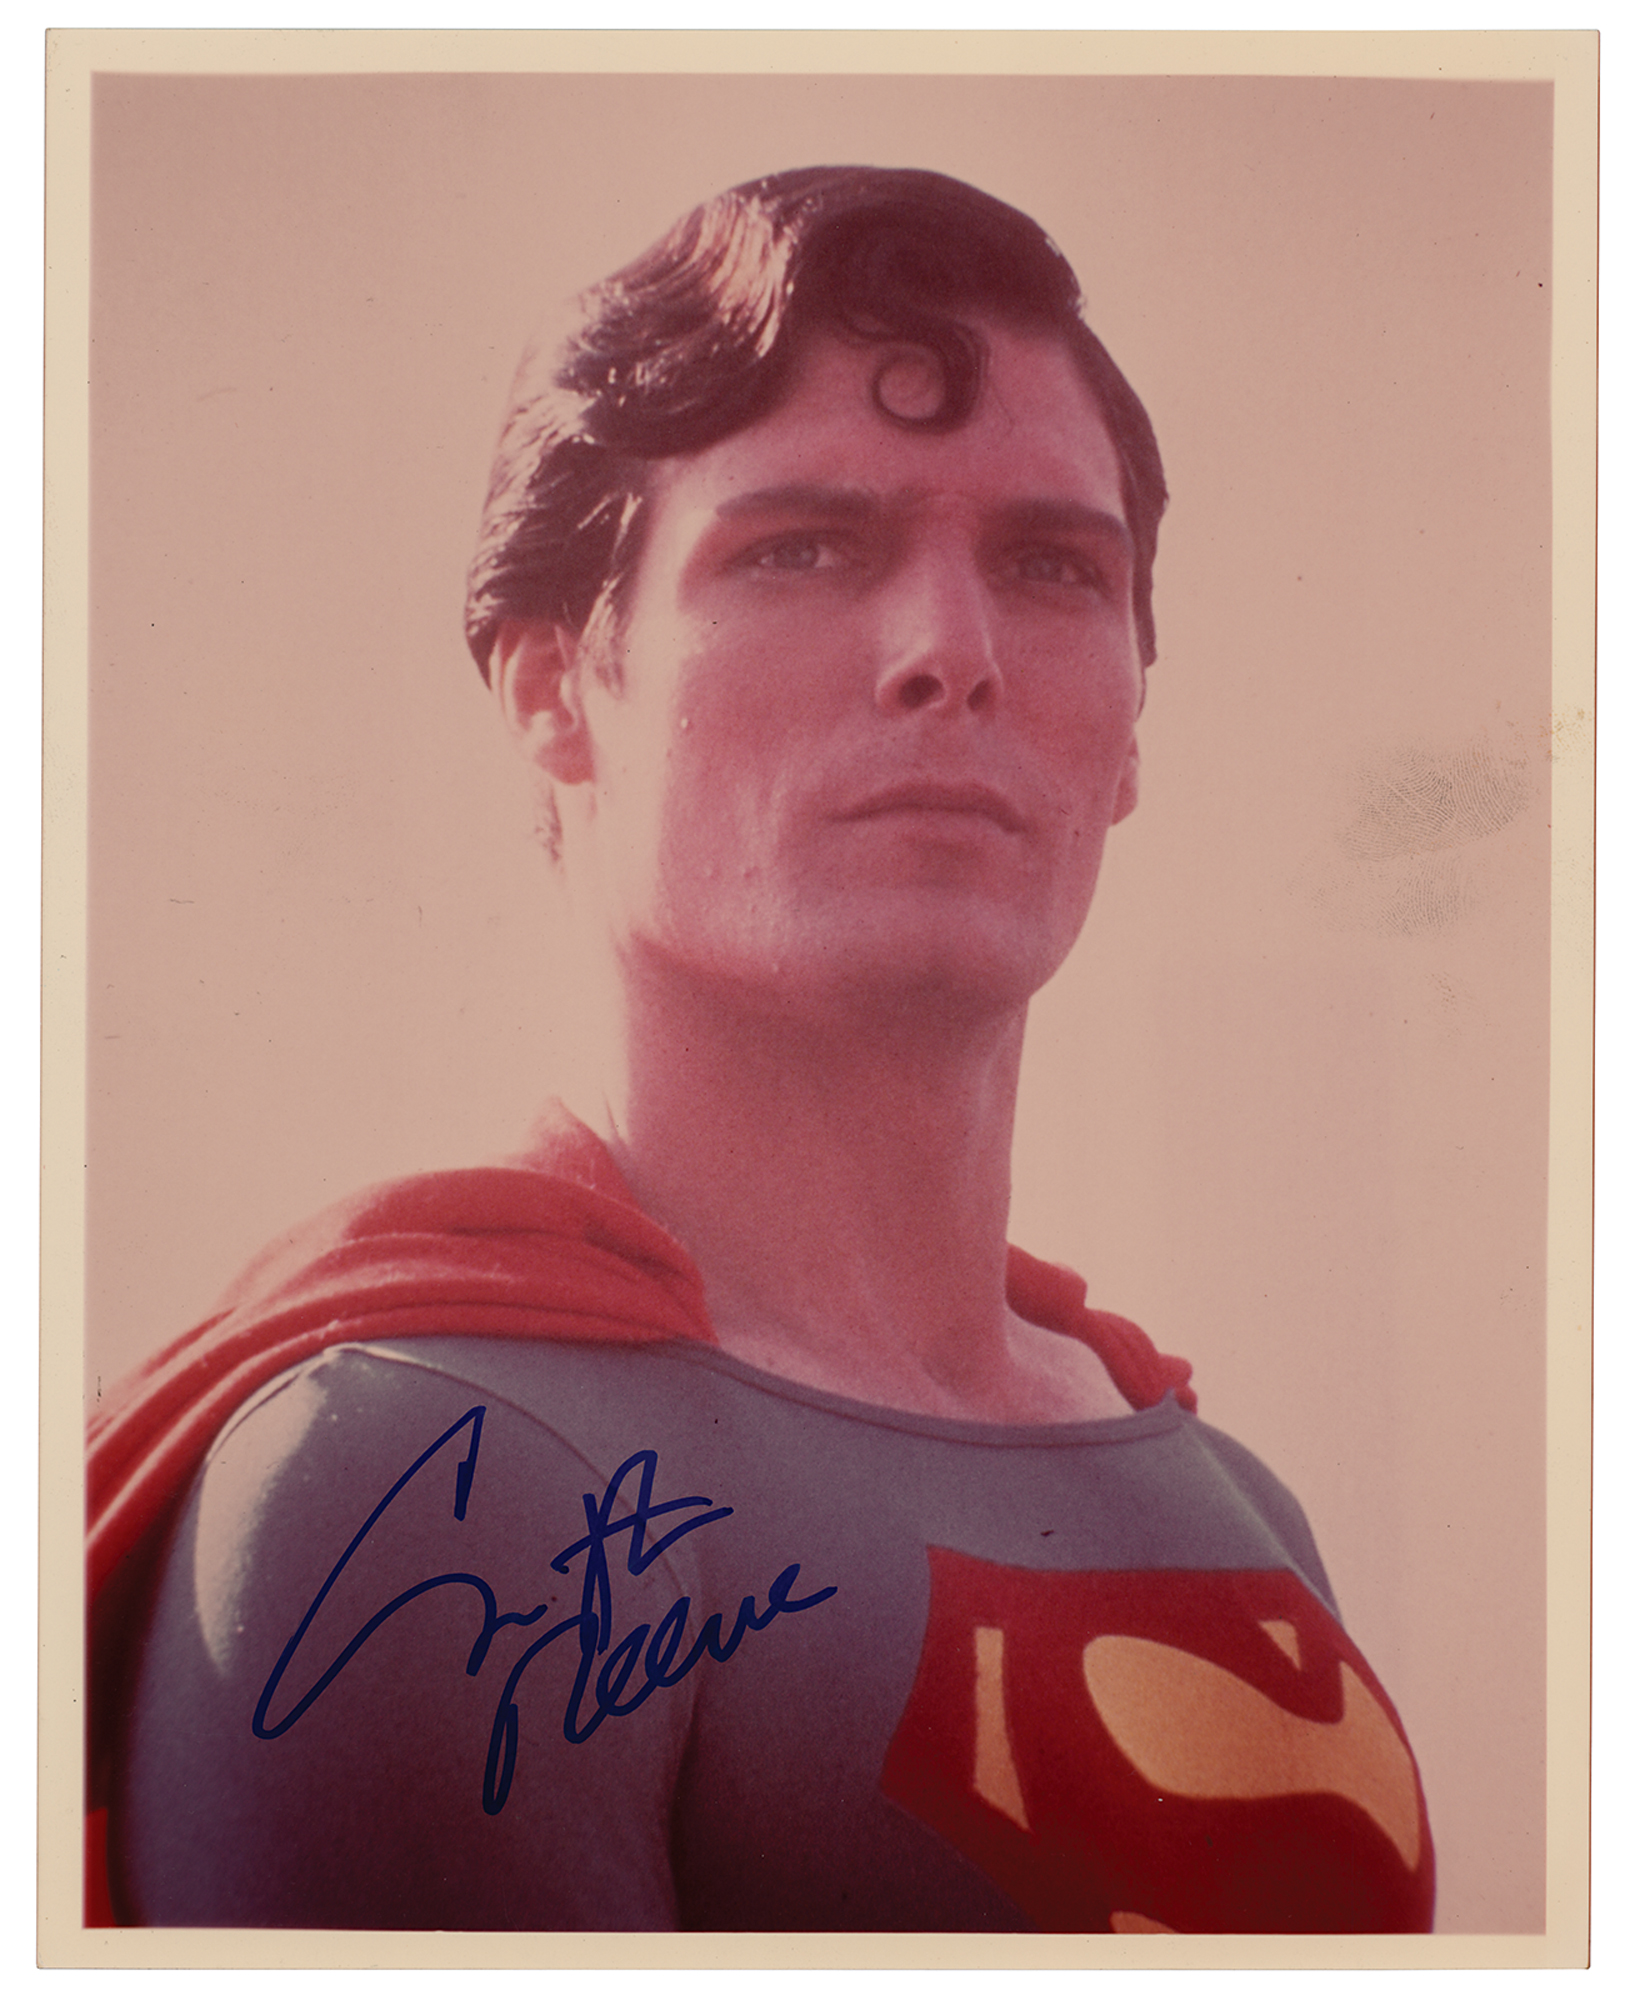 Lot #5520 Christopher Reeve Signed Photograph